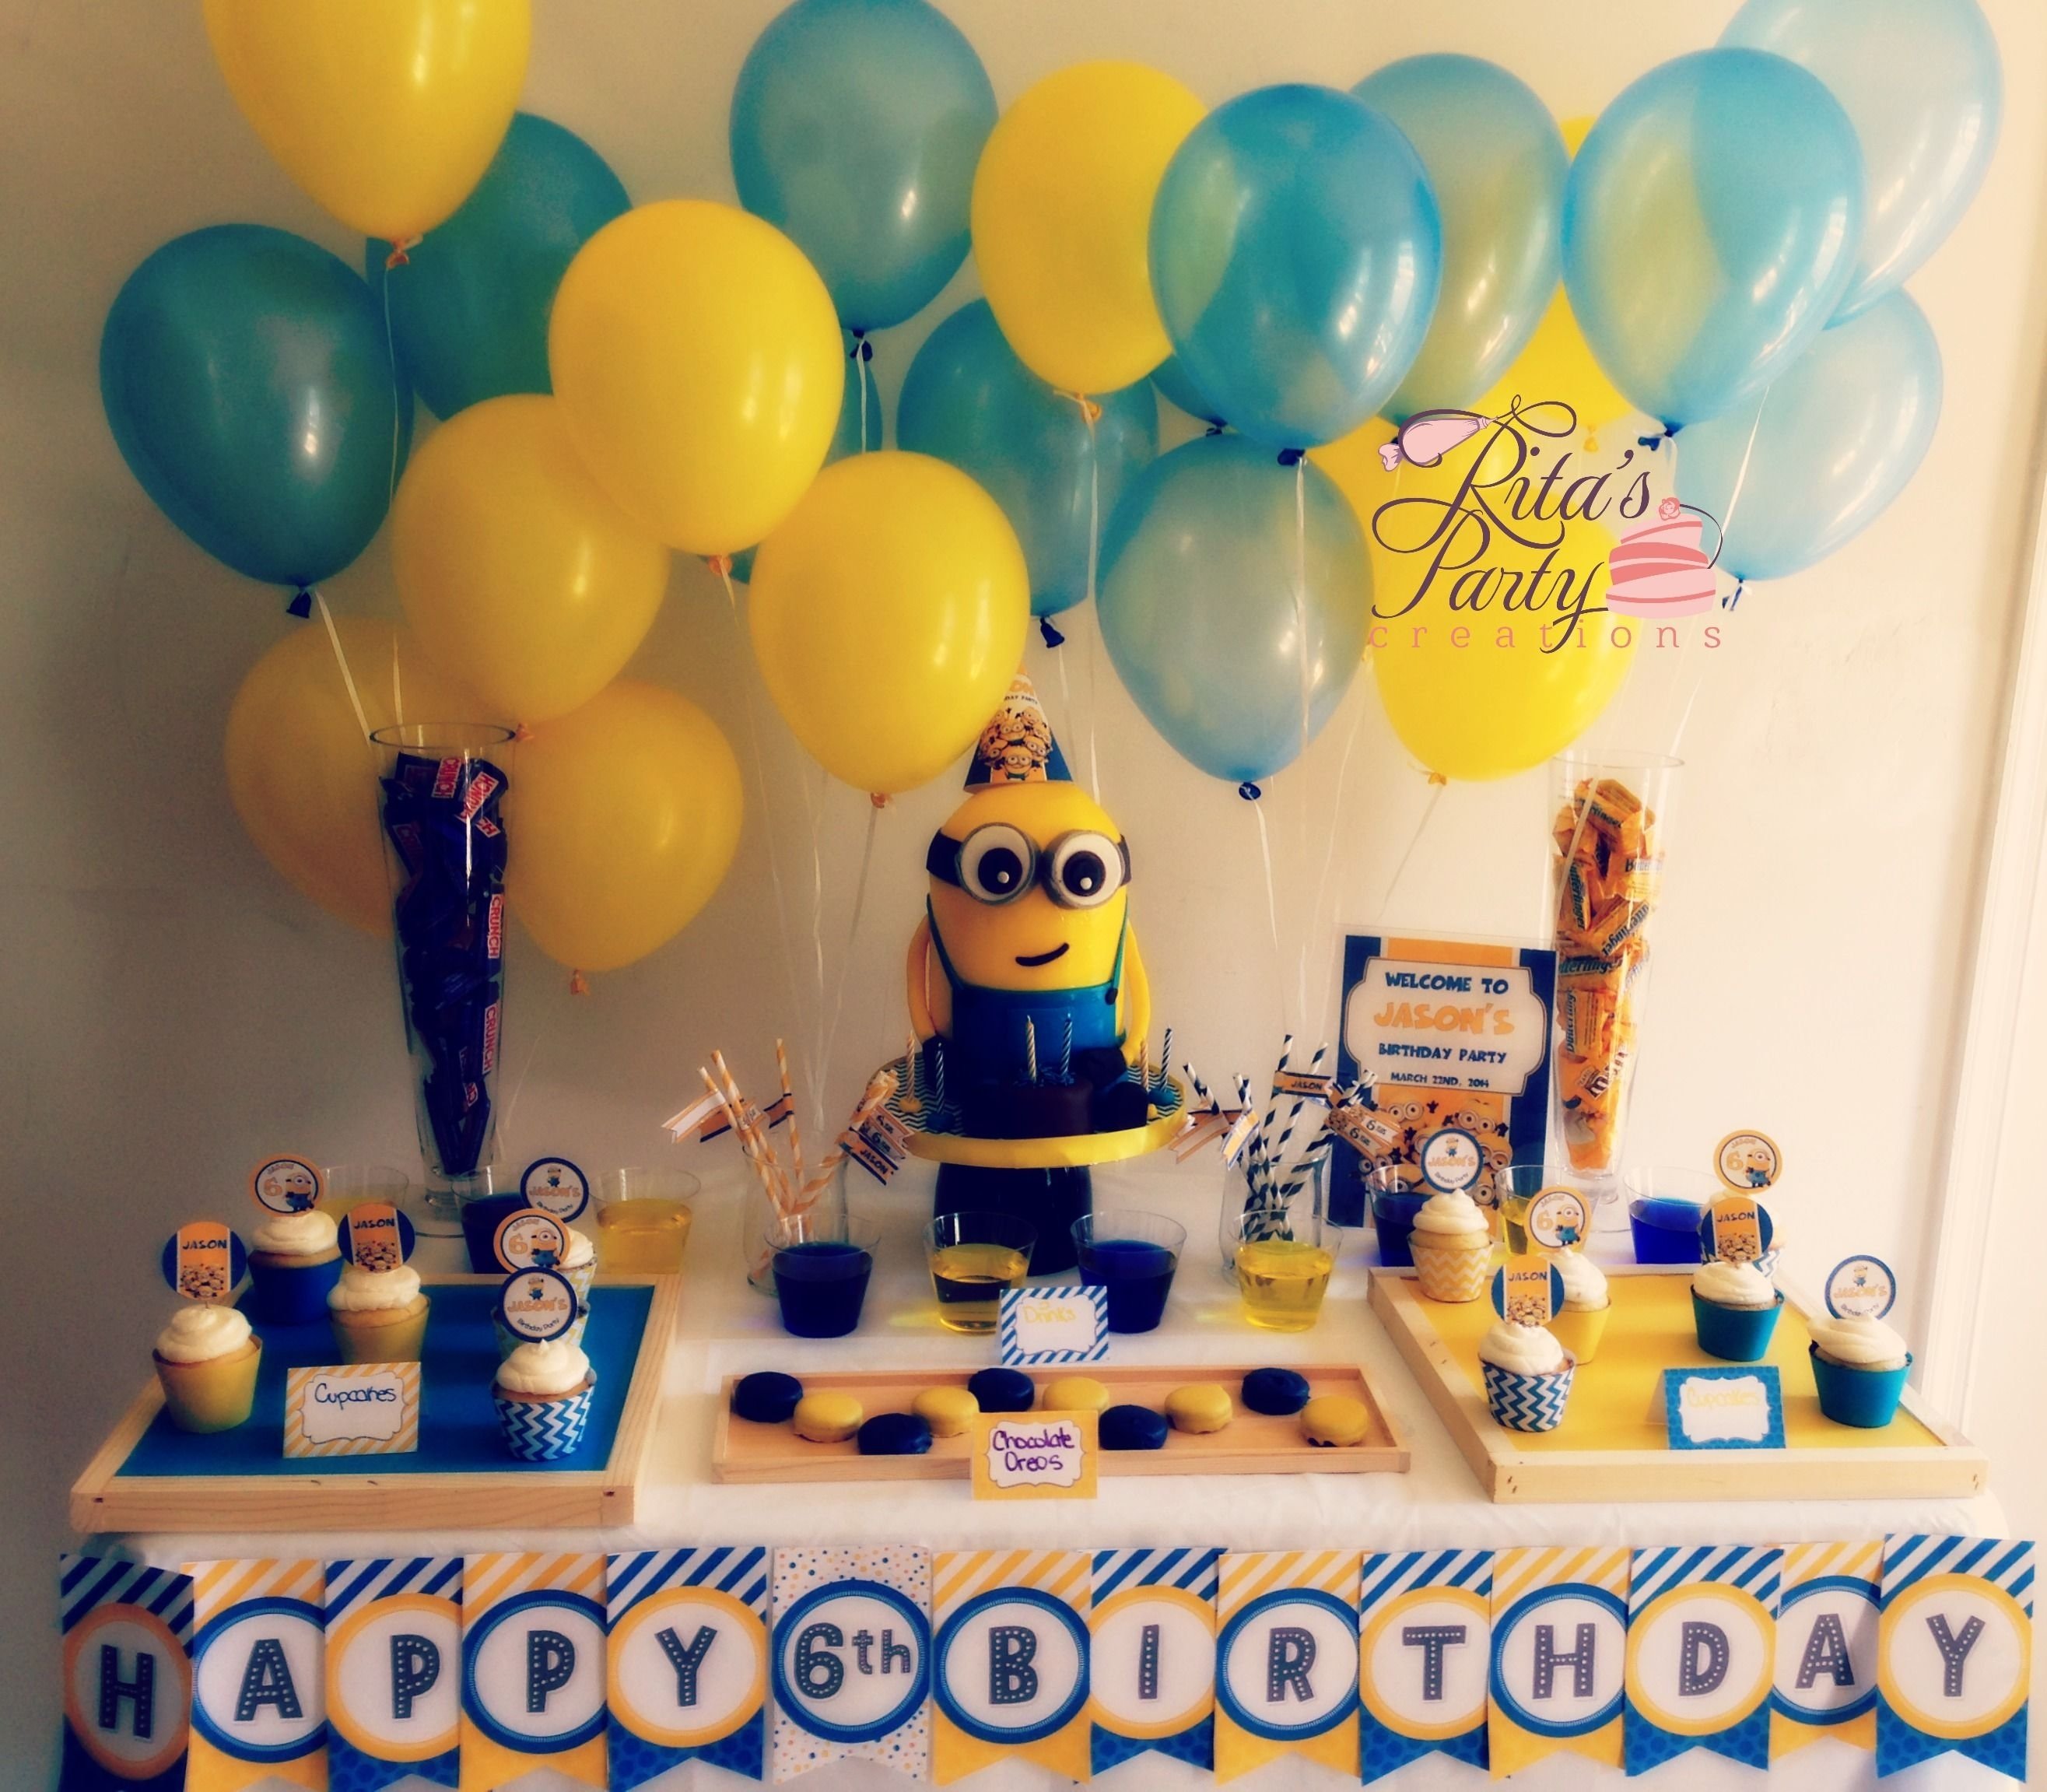 10 Ideal Birthday Party Ideas For 1 Year Old Boy despicable me party table for a 6 year old boy birthday cake in 1 2022